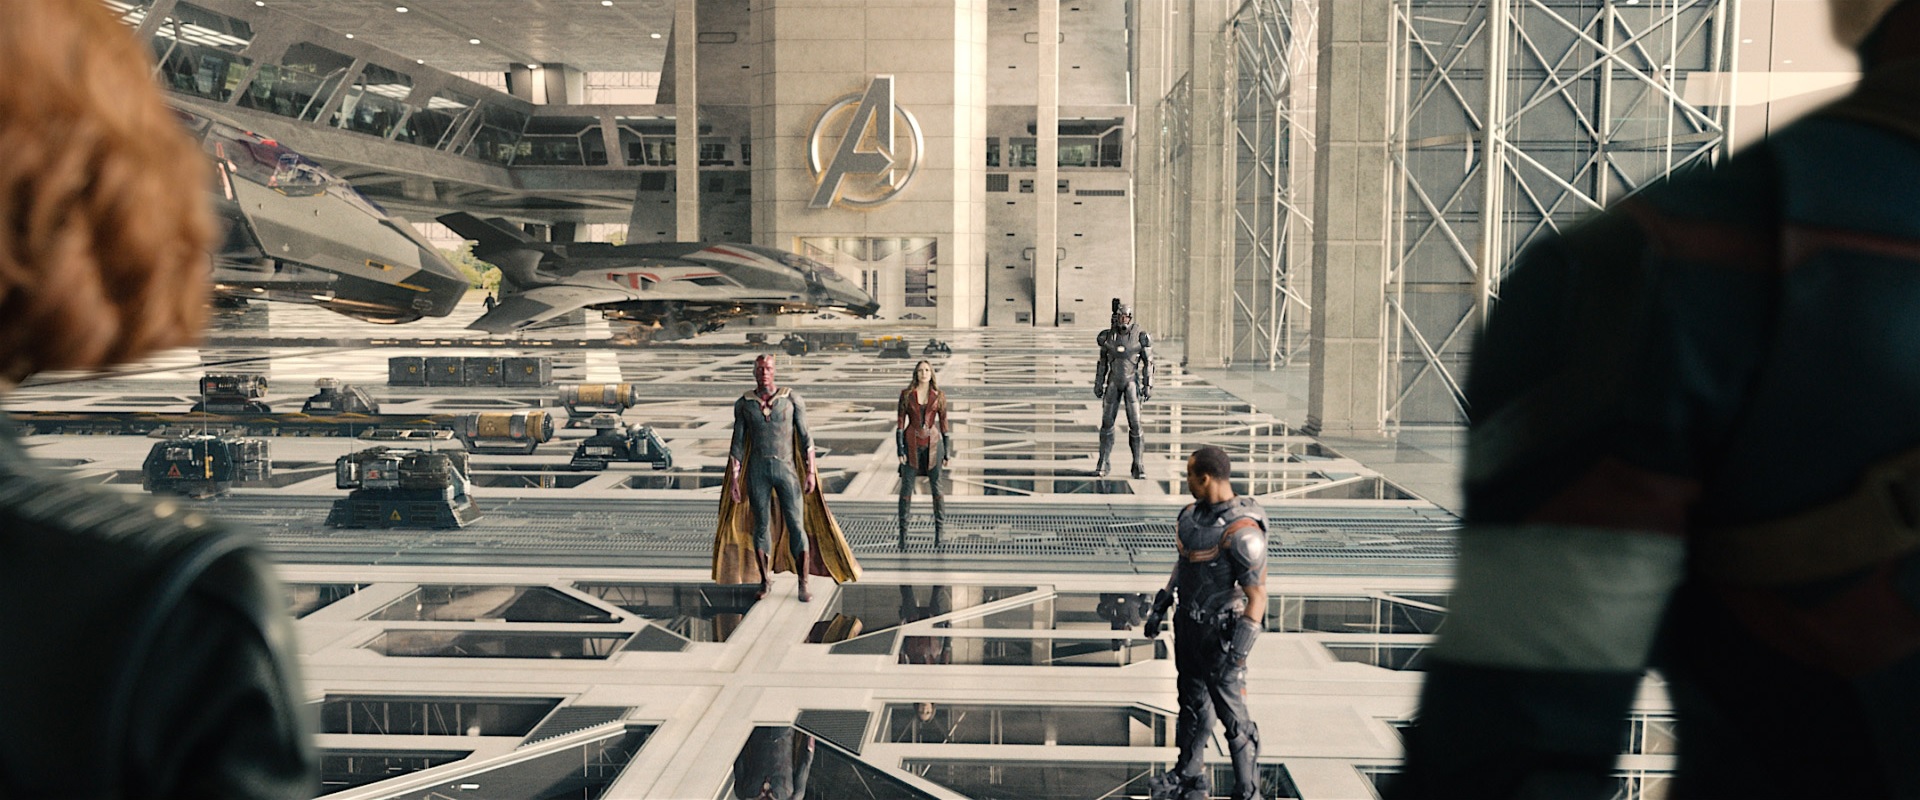 The Avengers officially have a bizarre new headquarters